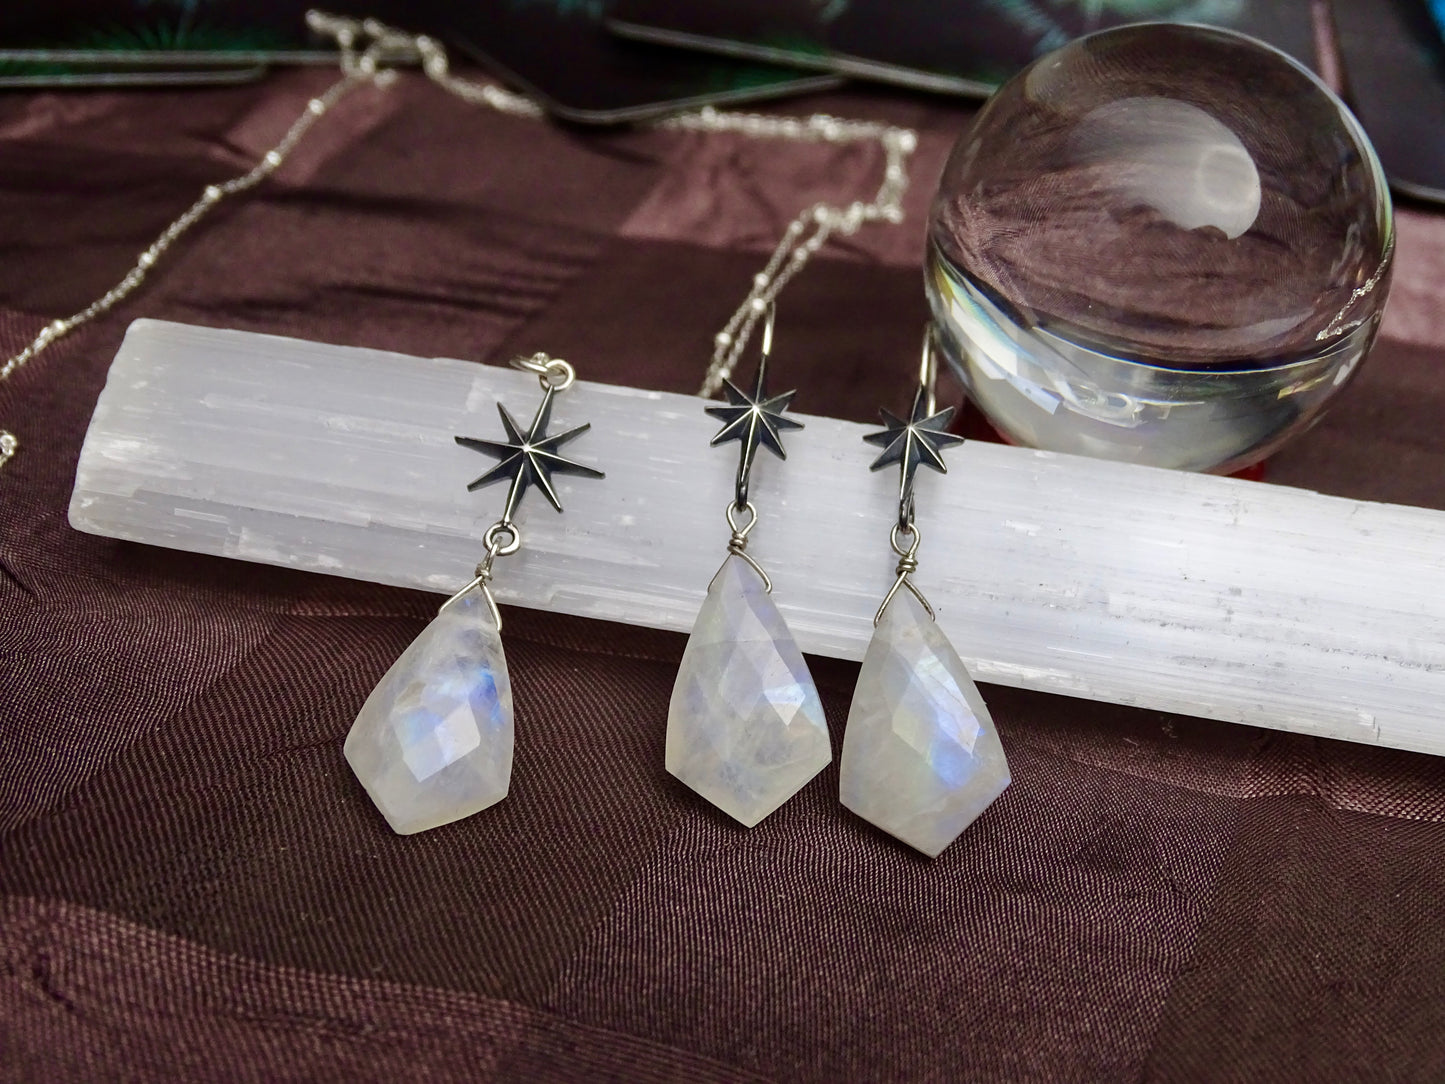 North Star Necklace and Earring Set